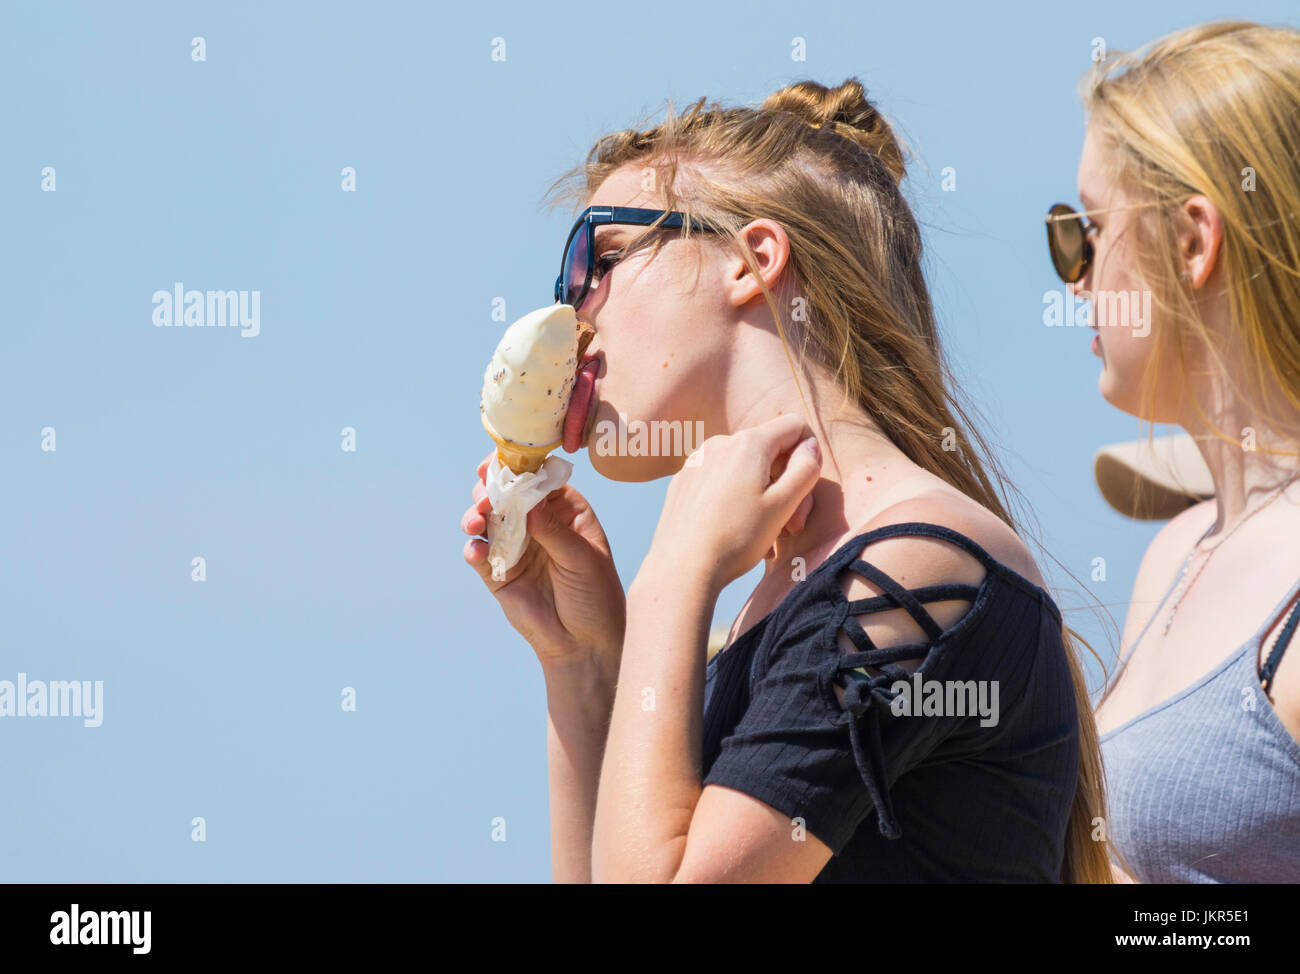 girl eating an ice cream cone on a hot day in Summer. Stock Photo